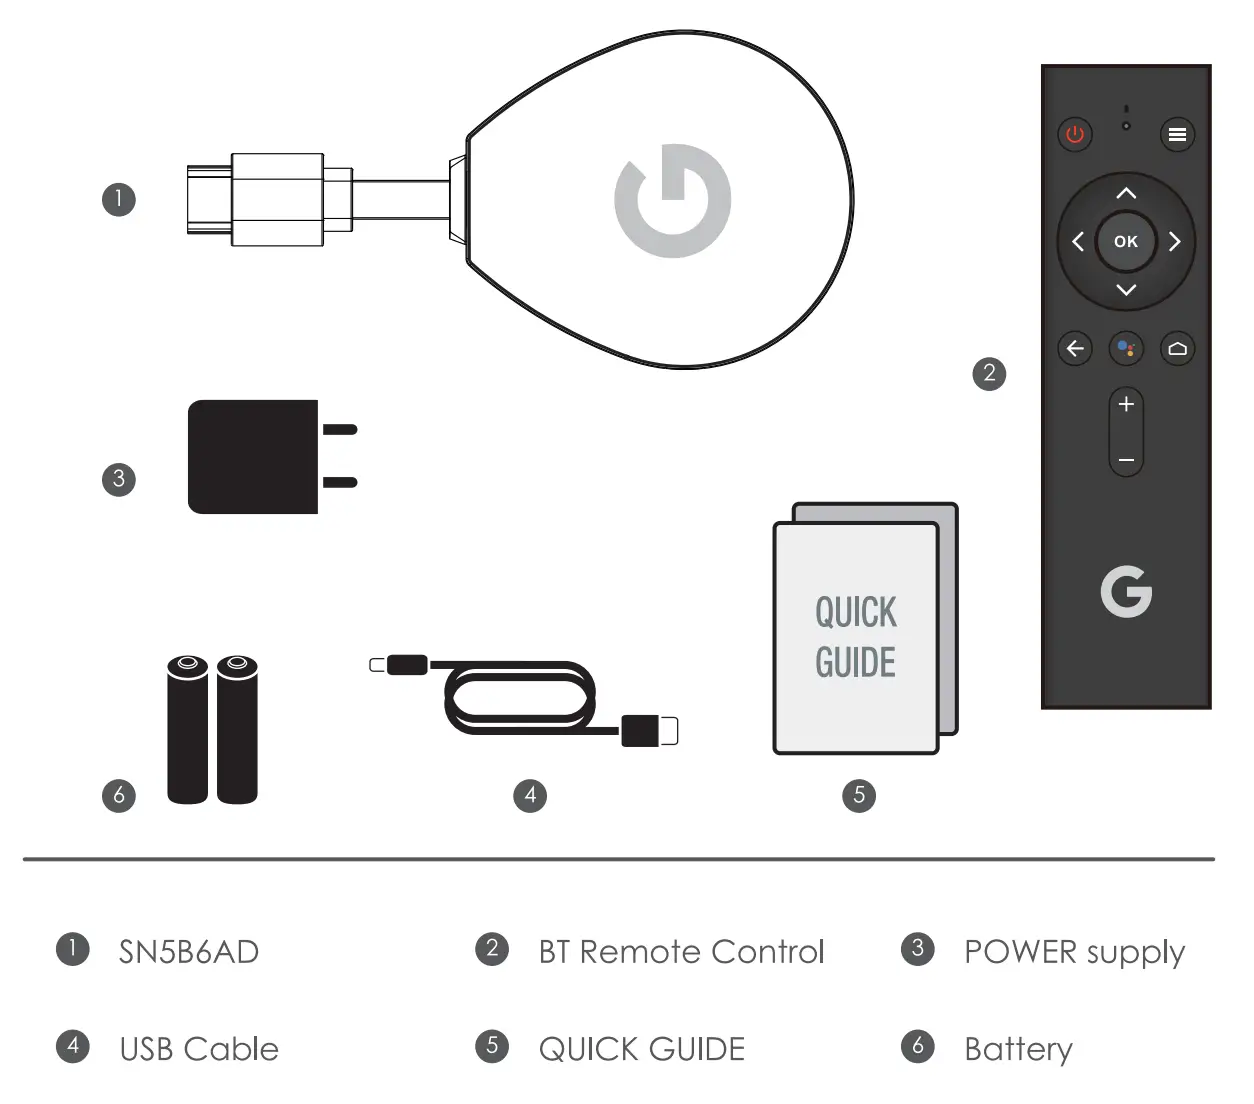 Google just launched a budget-friendly Chromecast powered by Google TV